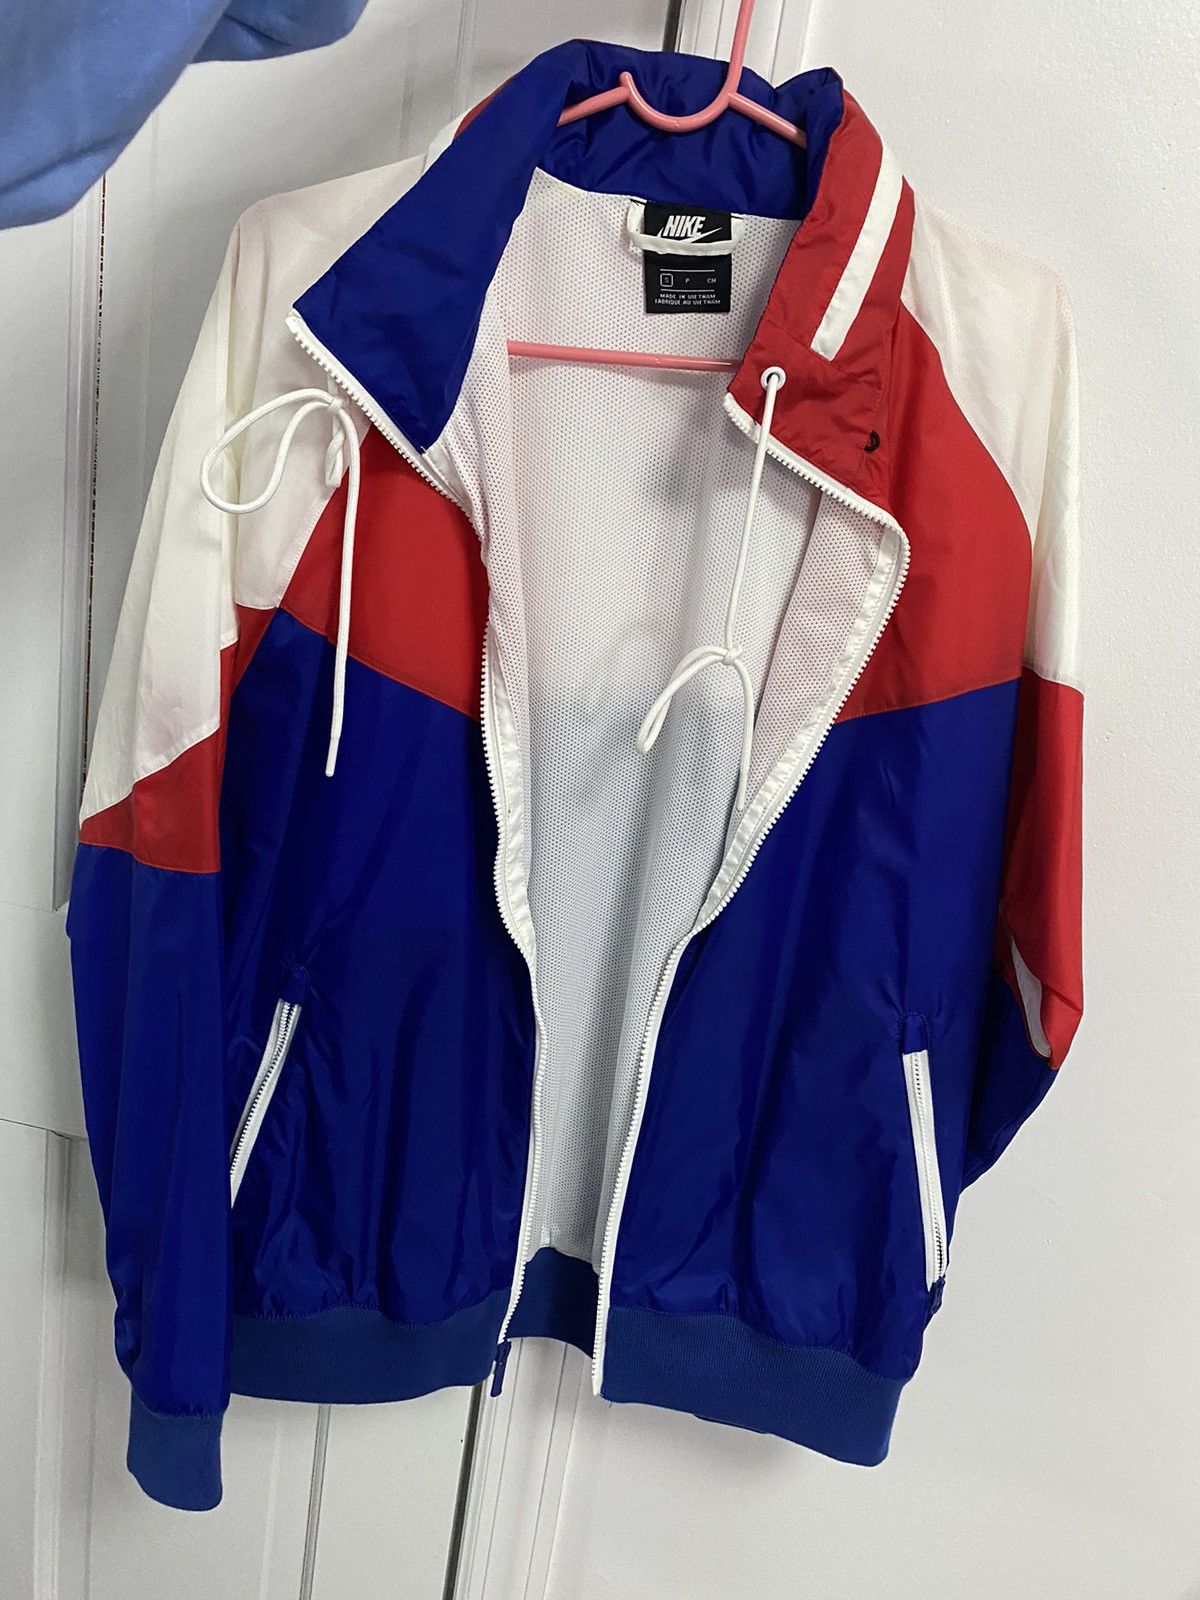 Nike Nike tracksuit Size US S / EU 44-46 / 1 - 2 Preview